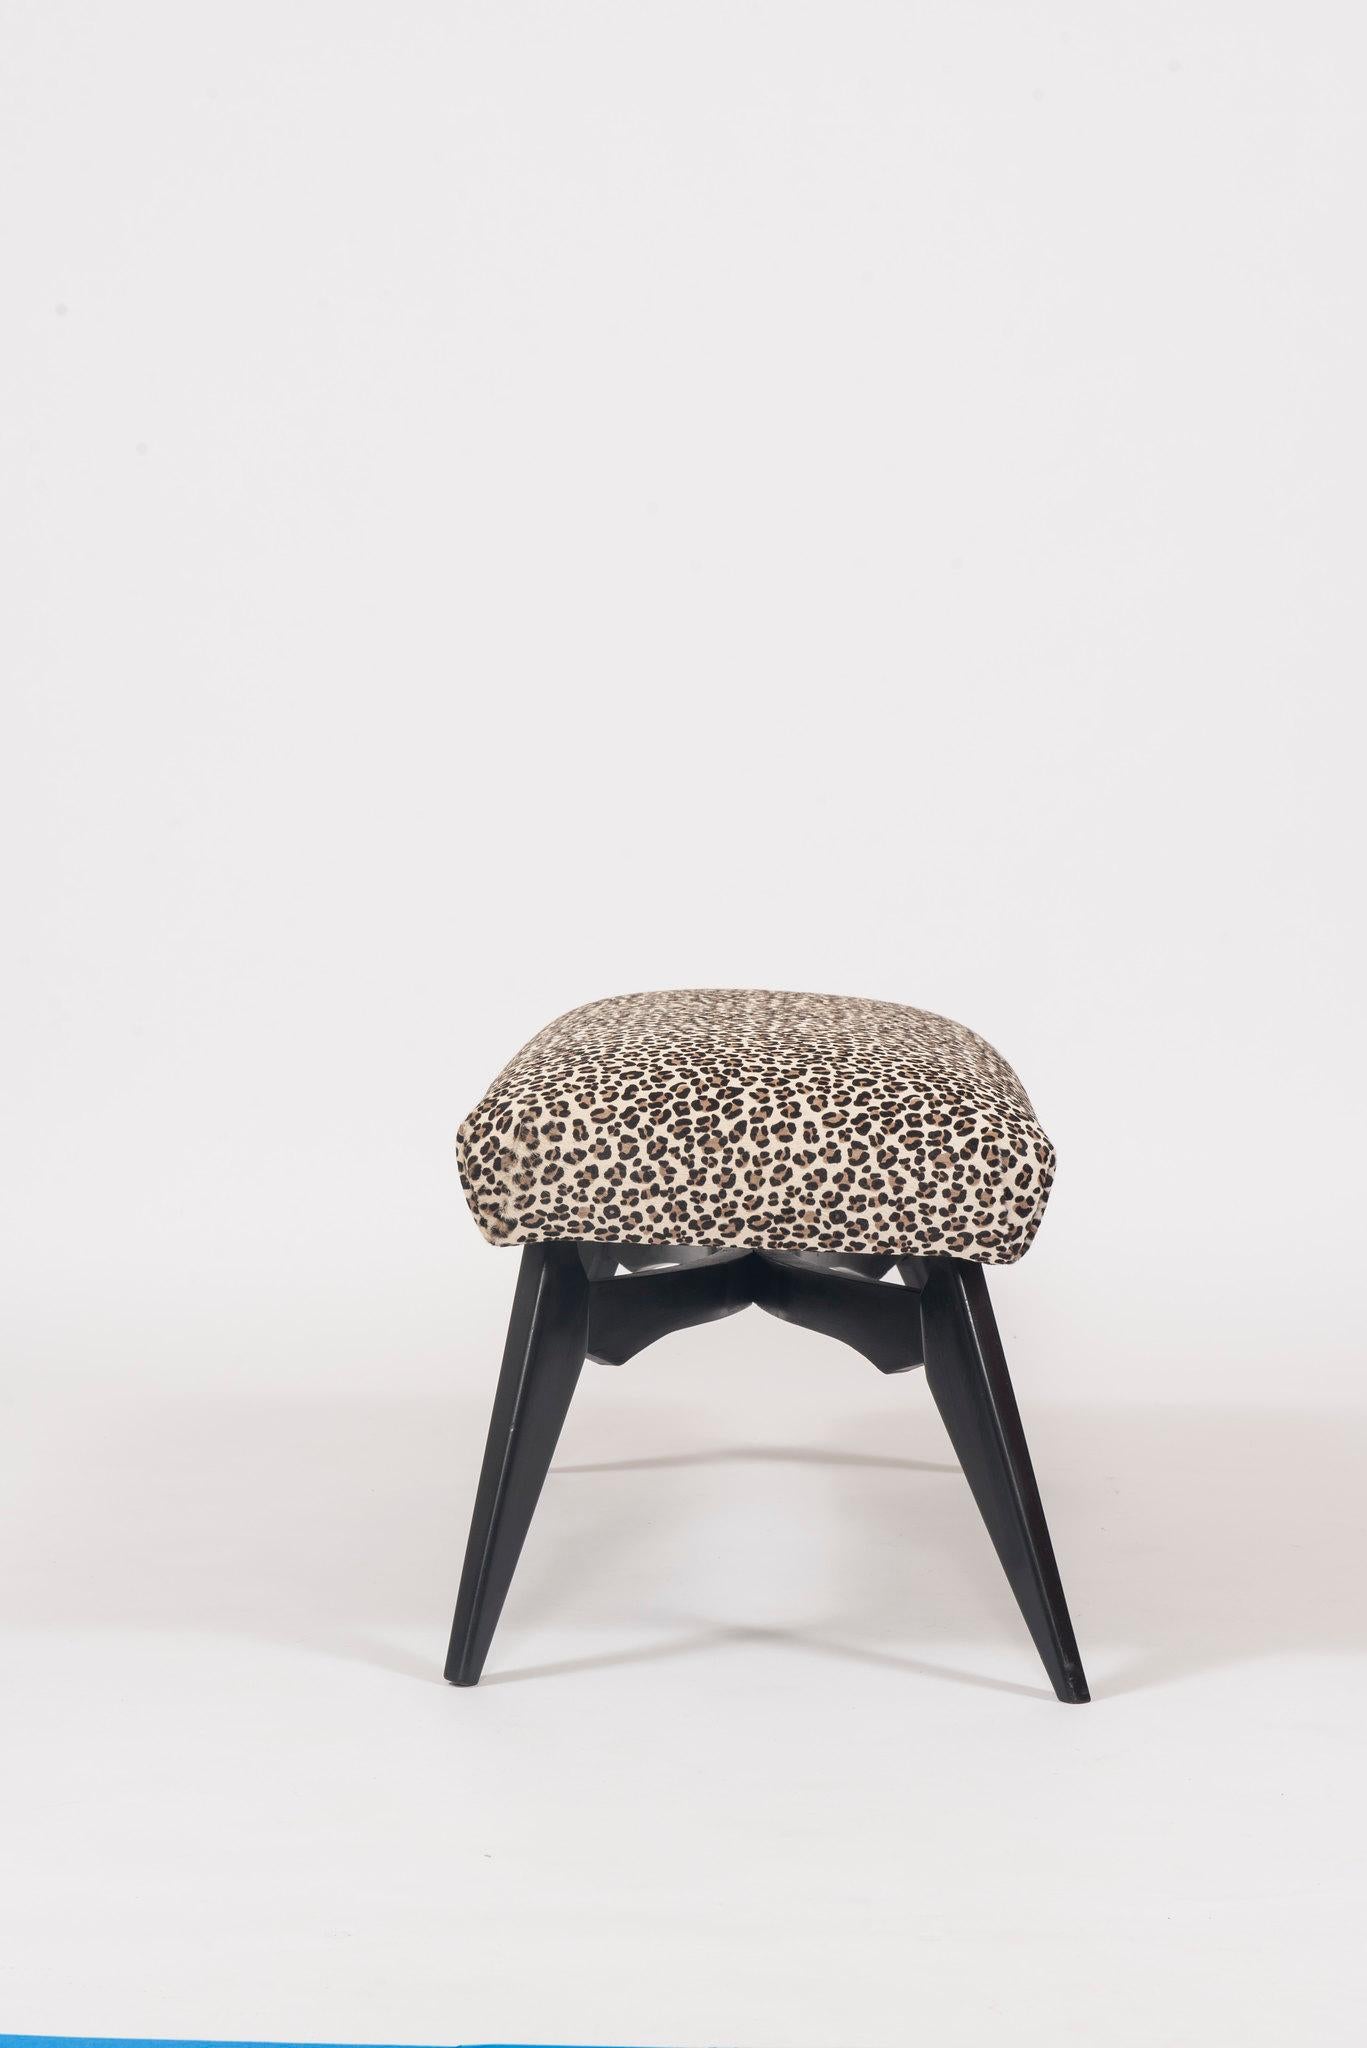 An ebonized Italian bench newly upholstered in a leopard printed hair hide.